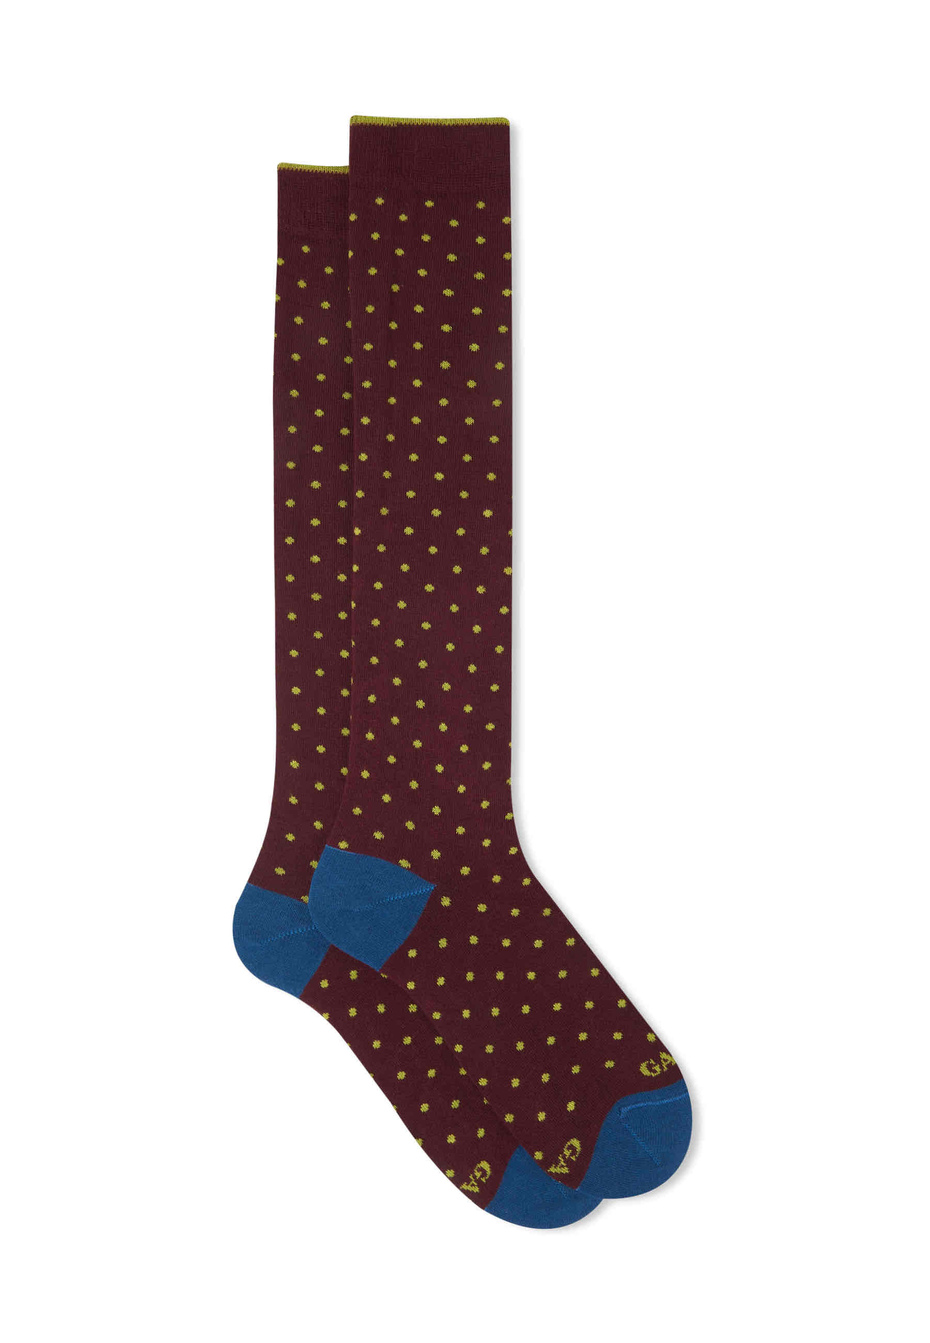 Women's long burgundy cotton socks with polka dots - Gallo 1927 - Official Online Shop